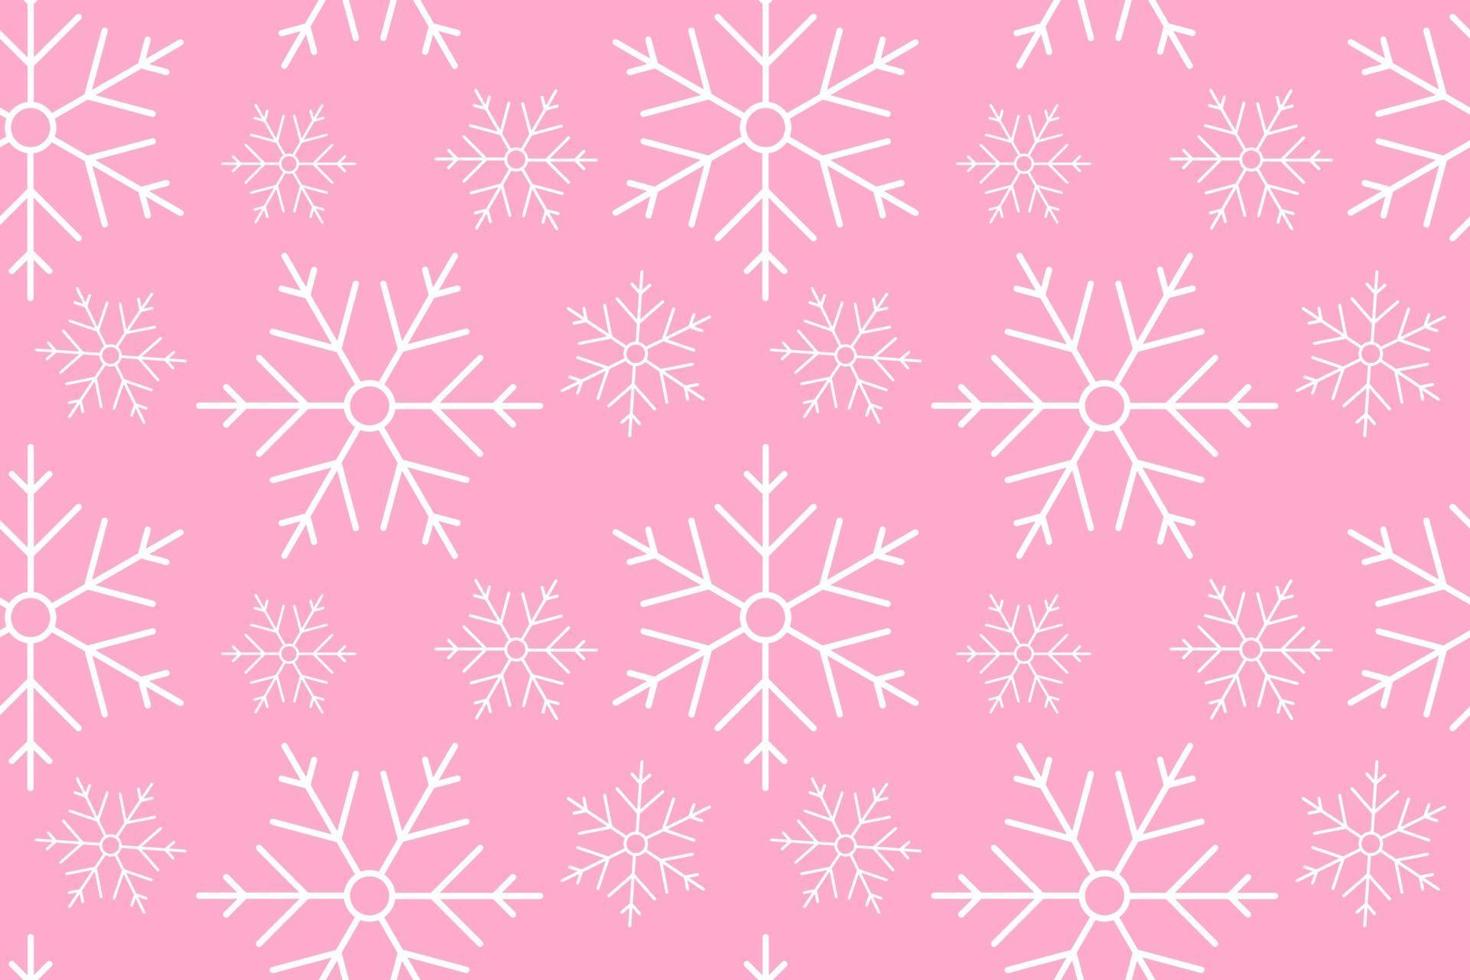 Abstract Snowflake Seamless Pattern Design vector